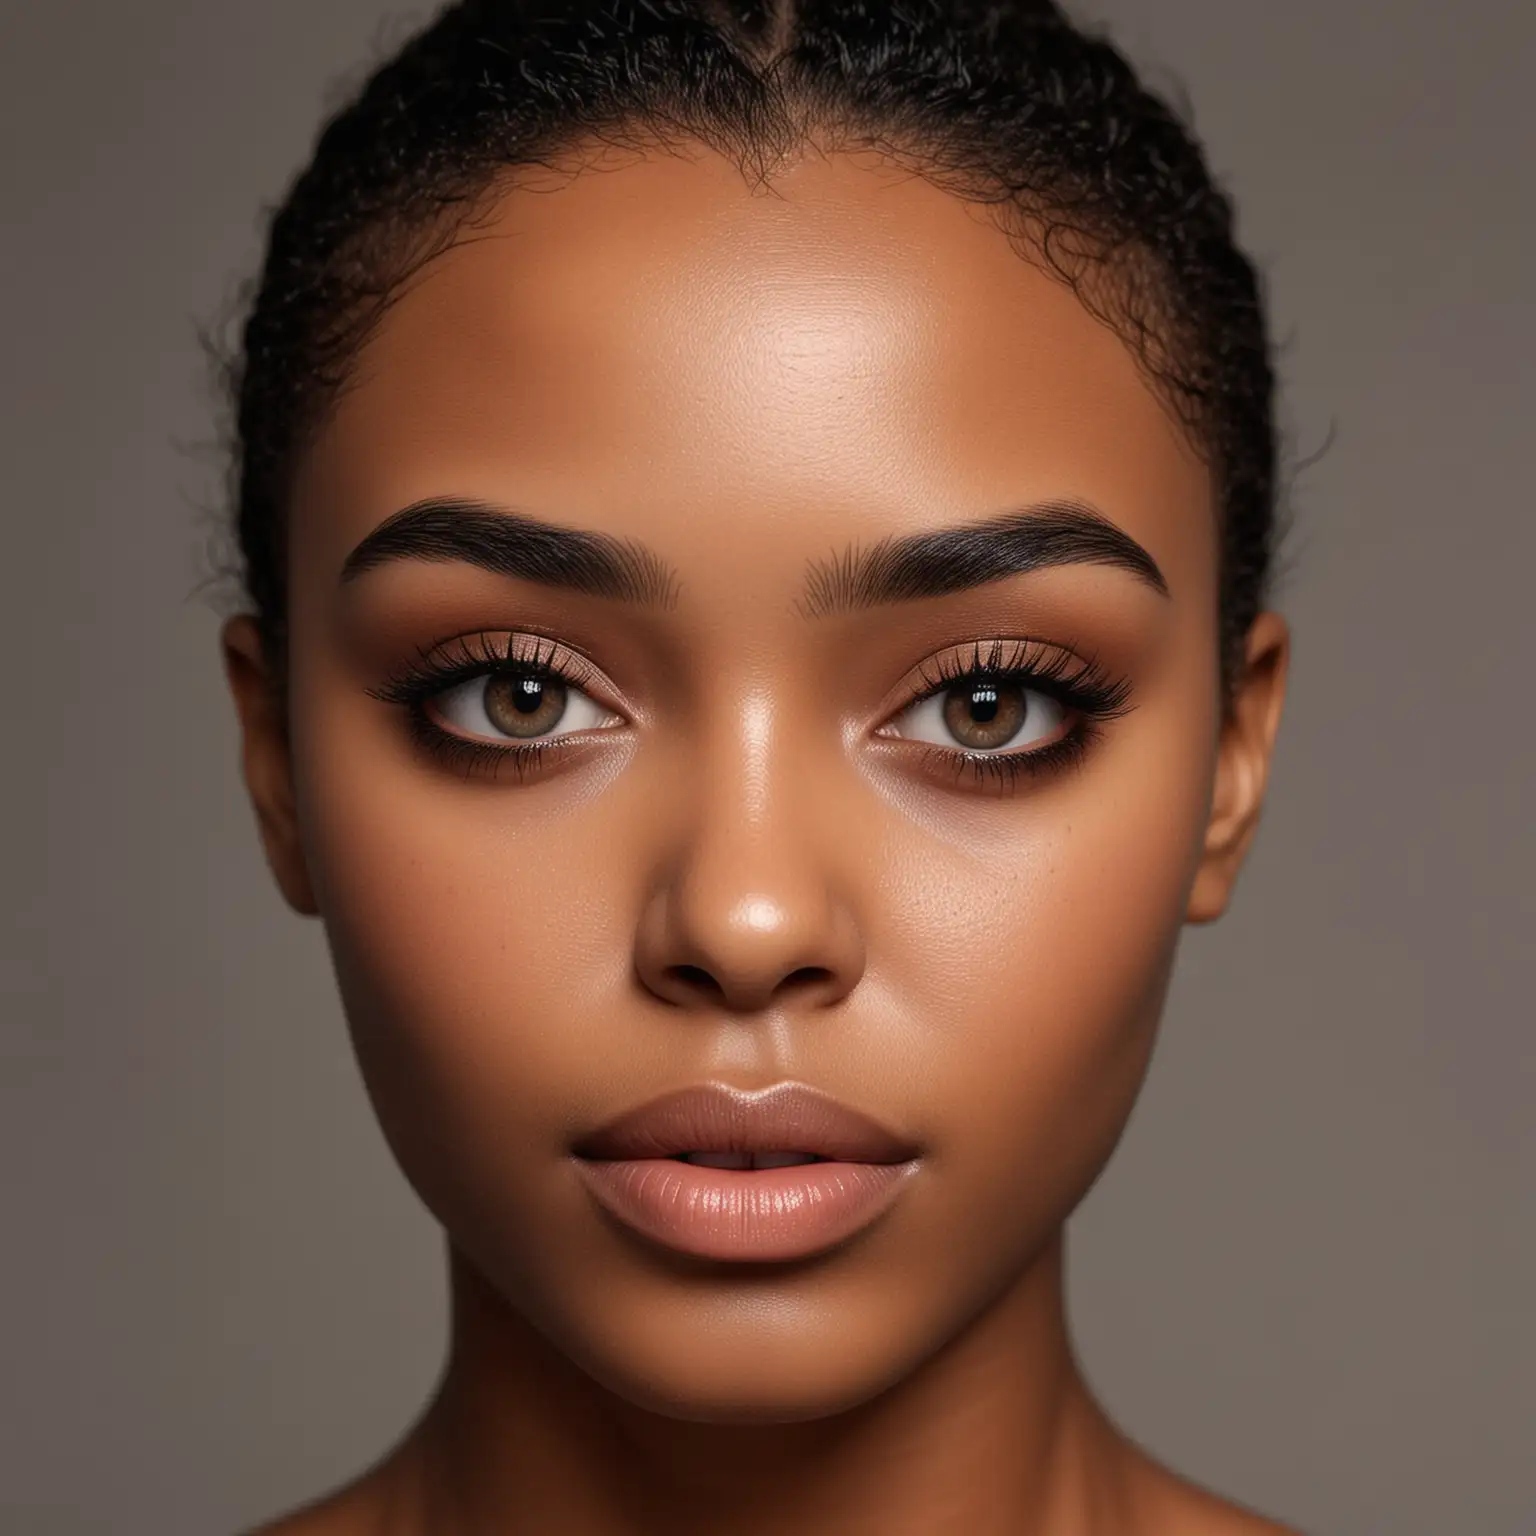 Realistic Black Female Face with Perfect Eyebrows and Natural Look